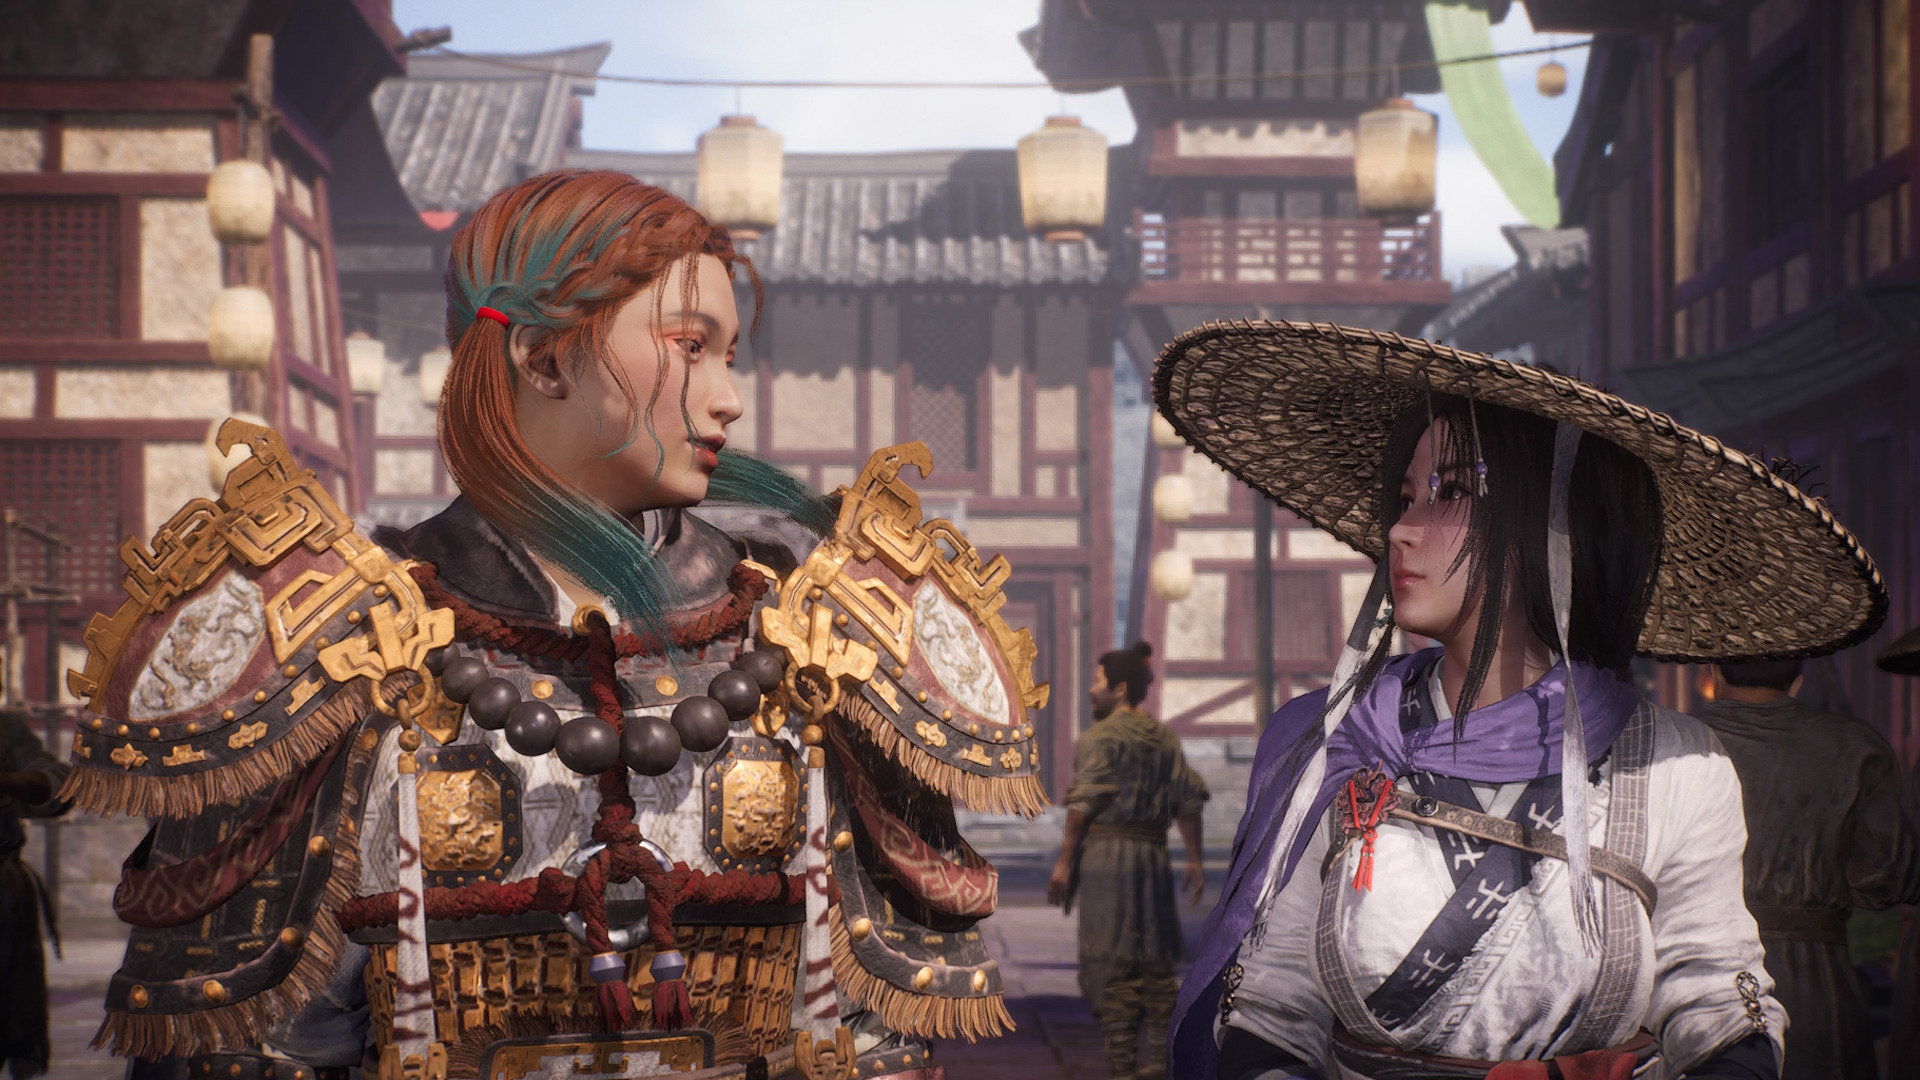 Wo Long Fallen Dynasty review: Two women speak to one another in a town